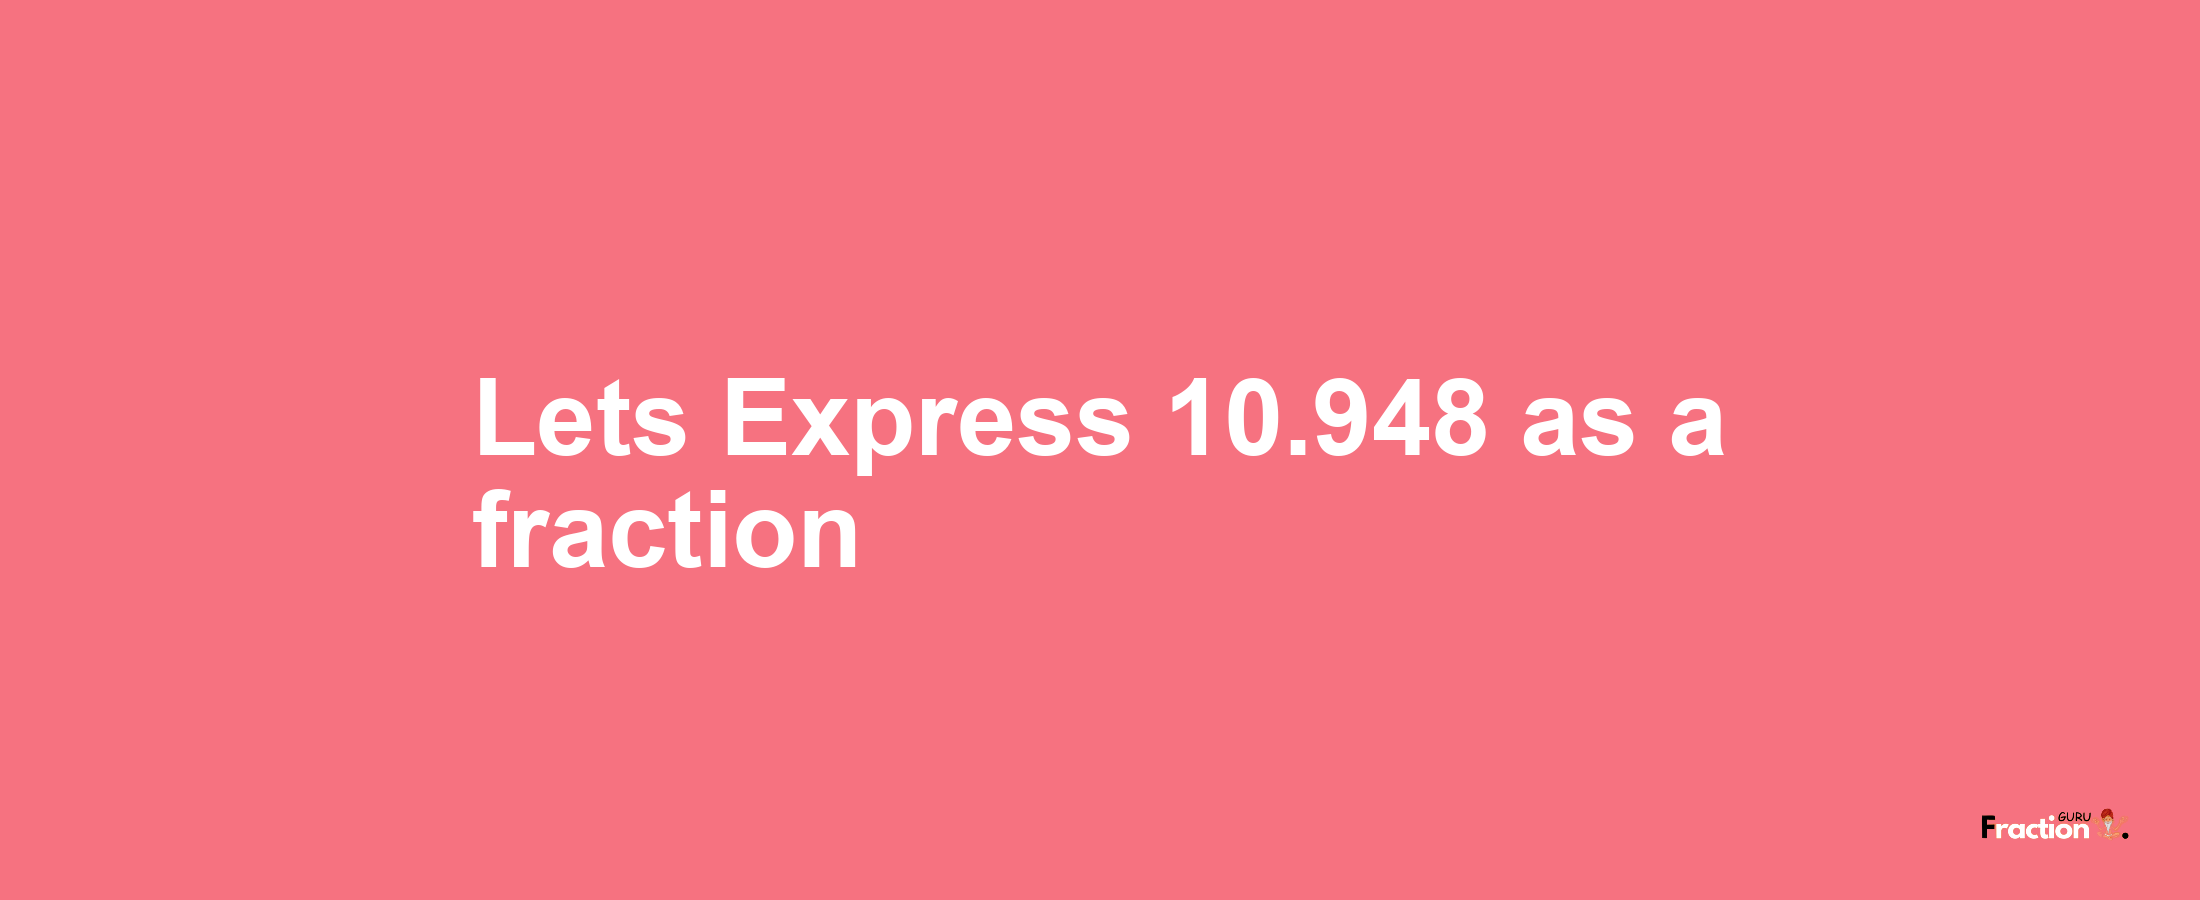 Lets Express 10.948 as afraction